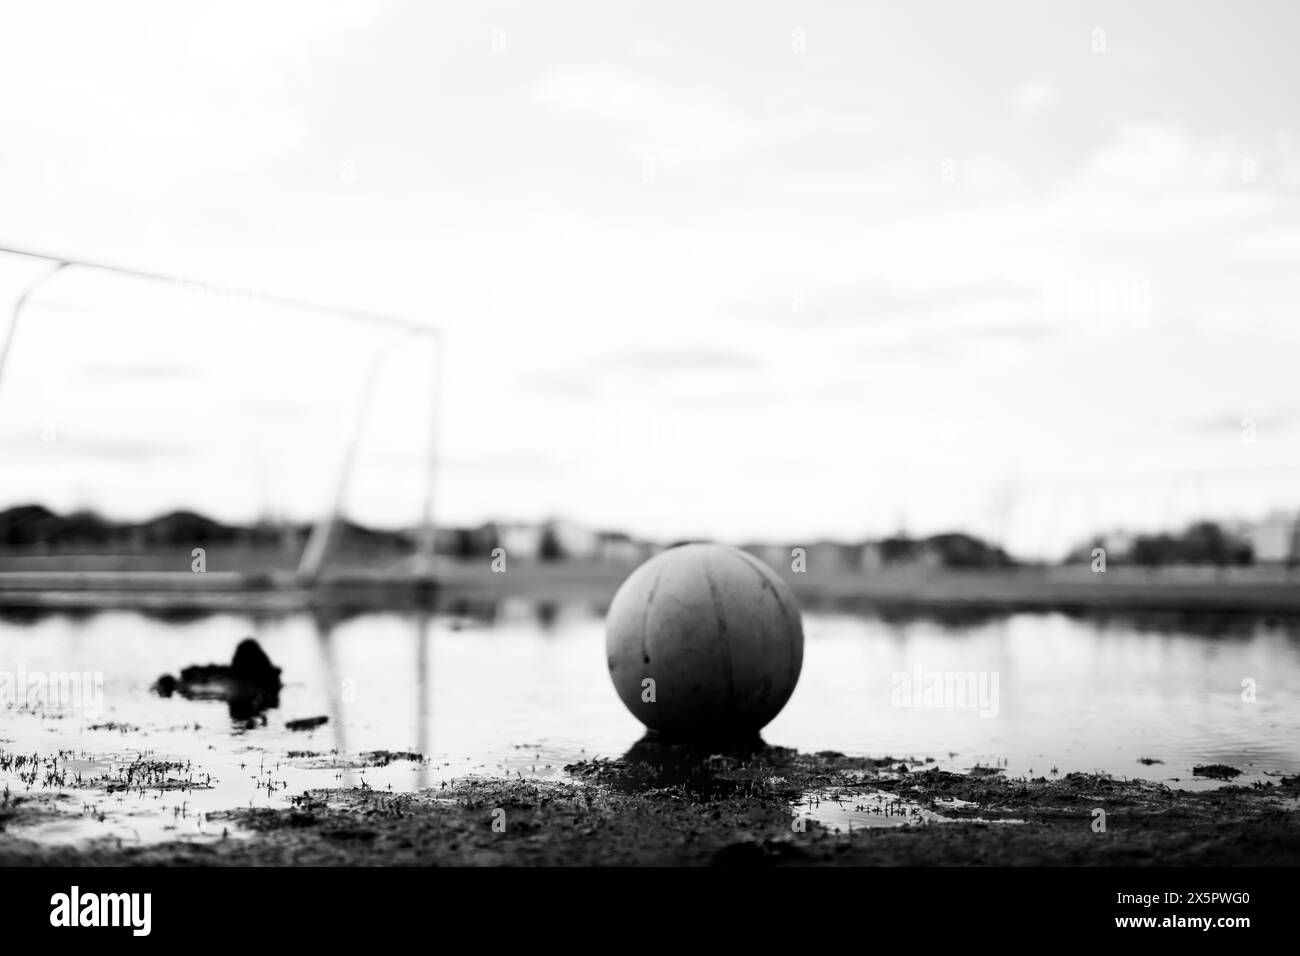 Selective focus on mud in front of a basketball sitting in a mudpuddle of water at a school playground.  Stock Photo